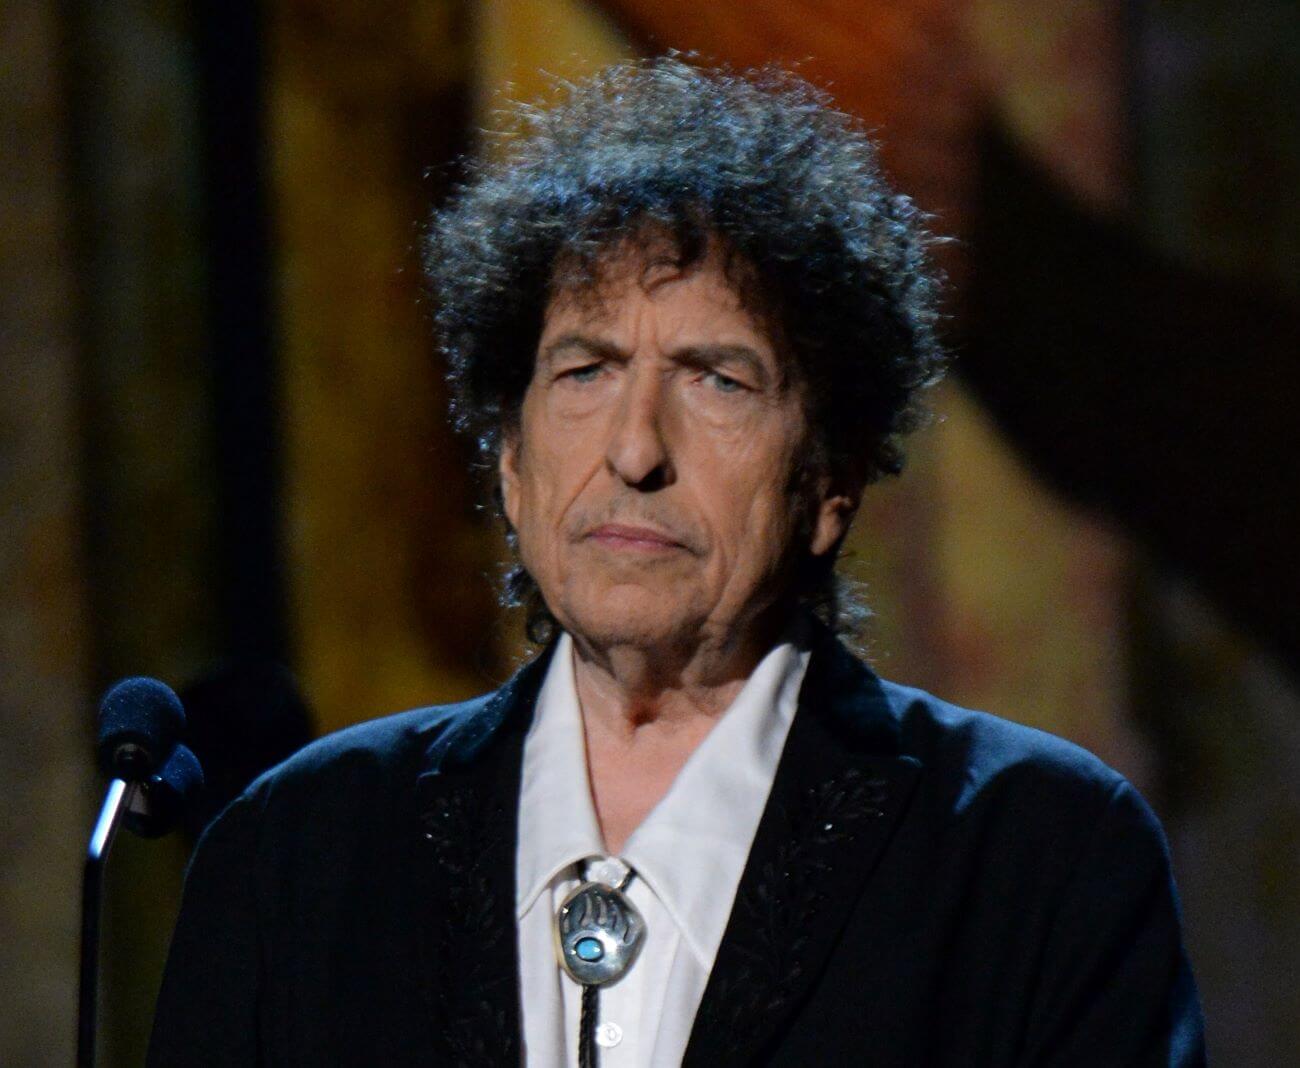 Bob Dylan wears a bolo tie and stands in front of a microphone.